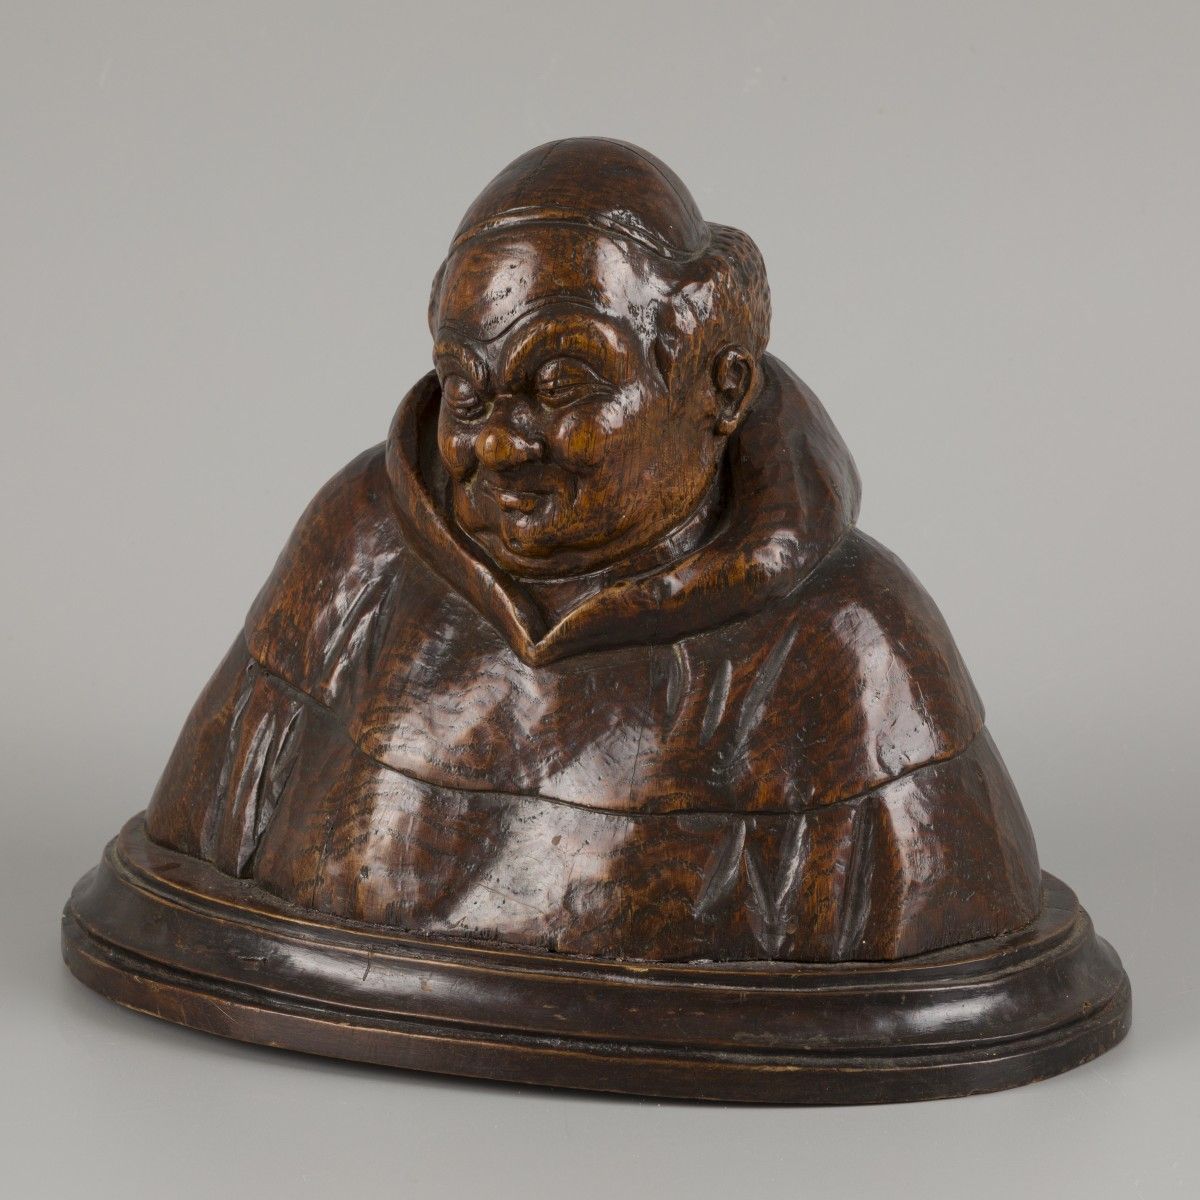 A wooden bust of a happy monk. 签名："F. Parpan"（背面）。高28厘米。估计：300 - 500欧元。